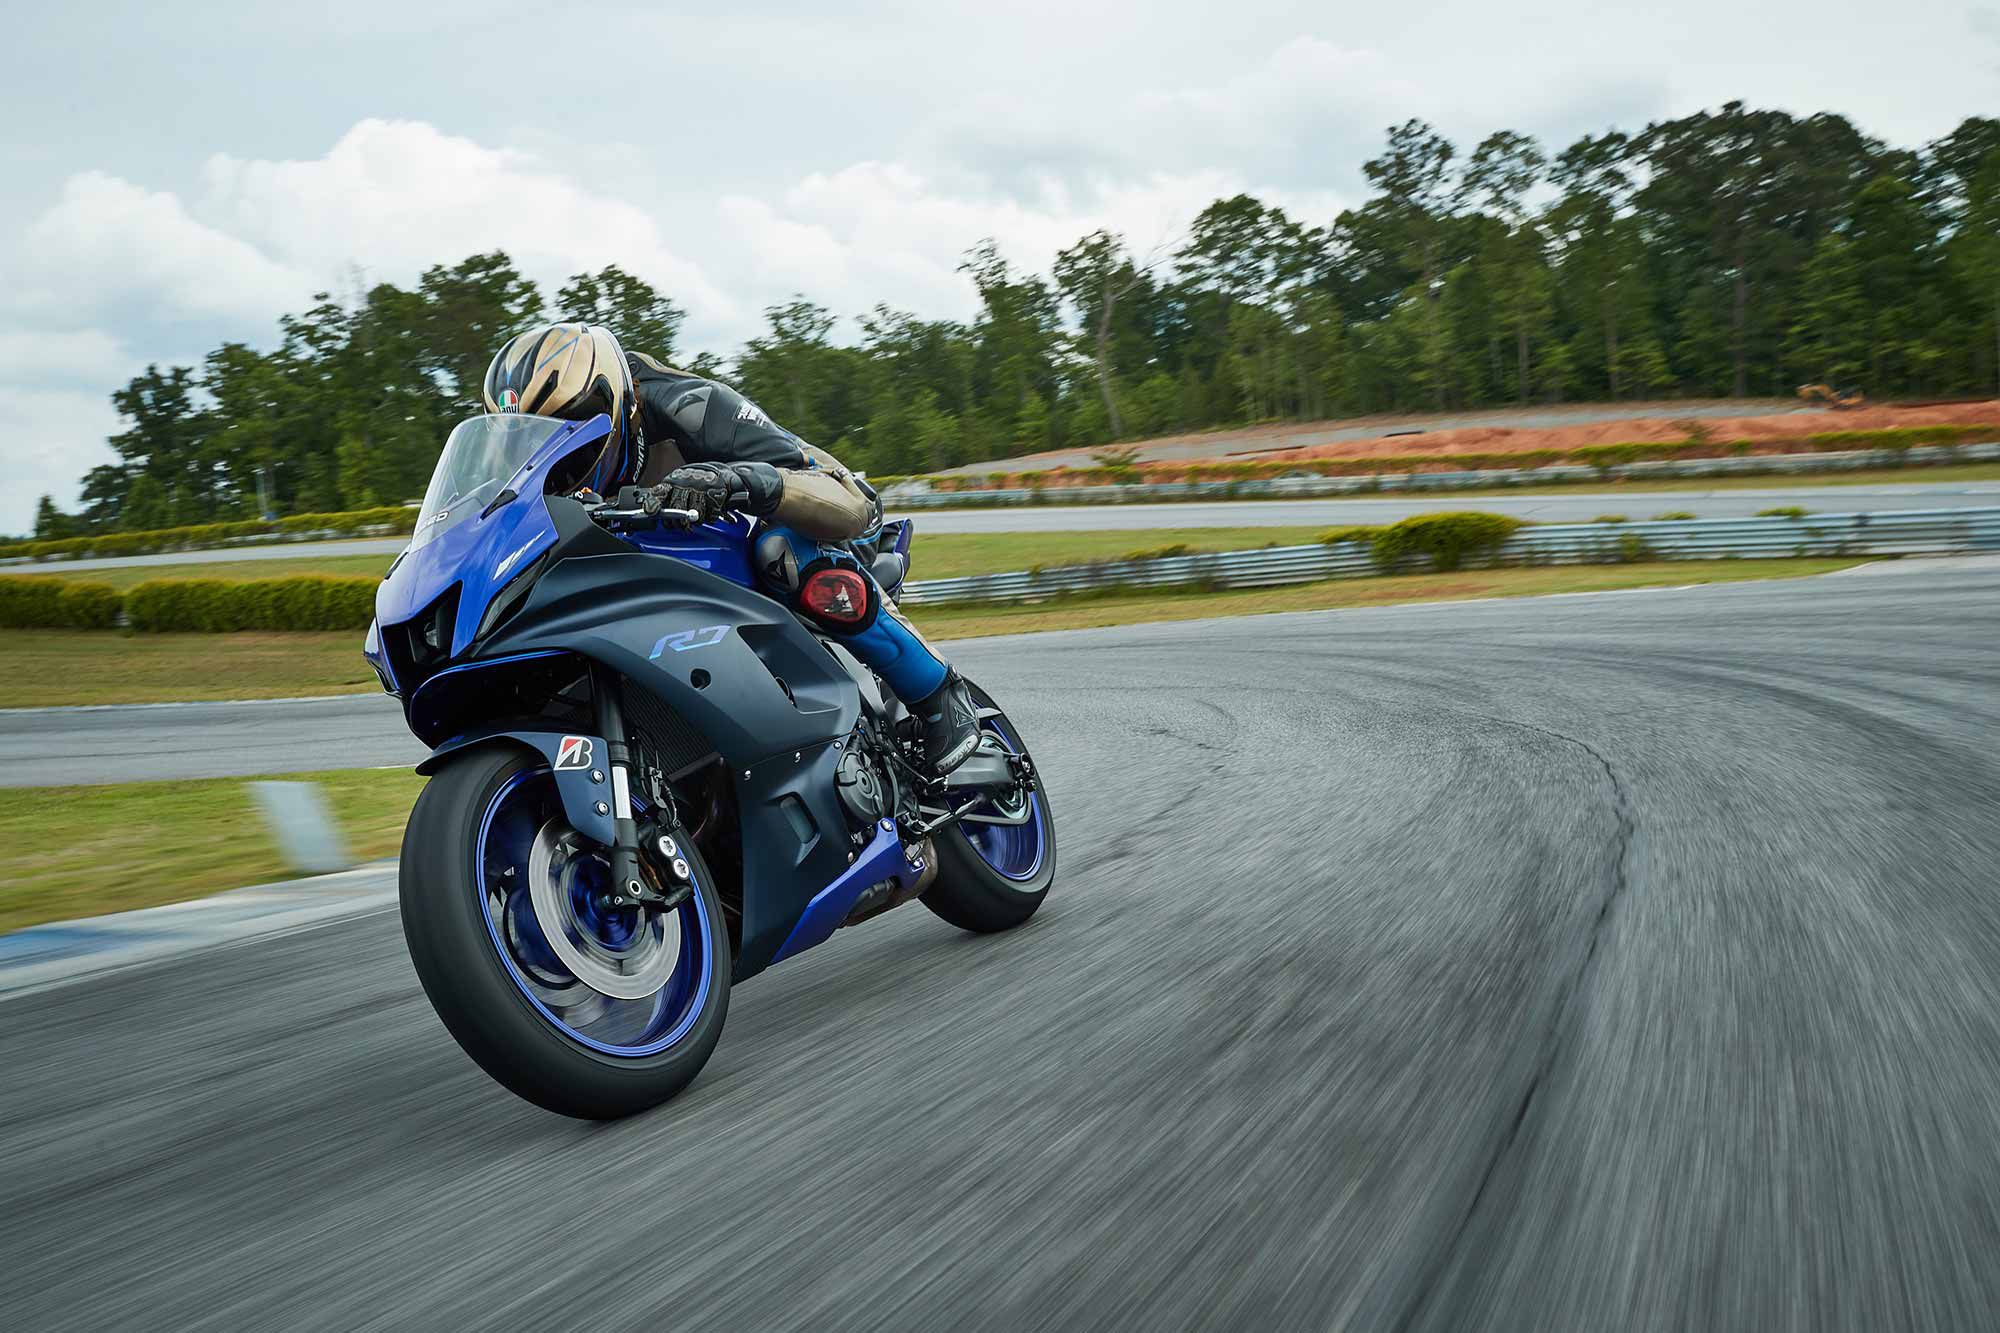 The ergonomics are sporty albeit a tad more forgiving than the YZF-R6 and YZF-R1.